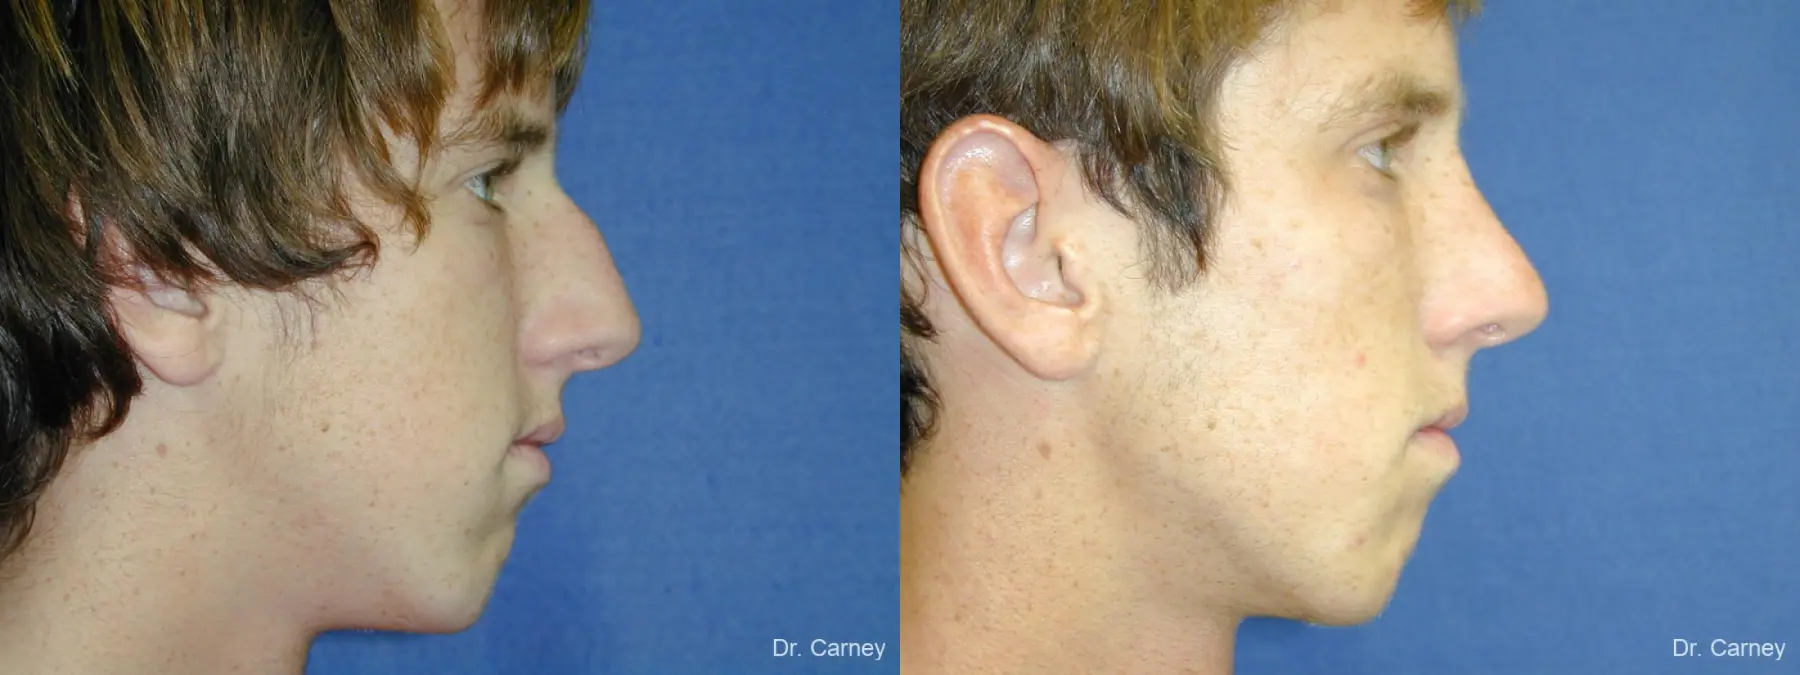 Virginia Beach Rhinoplasty 1219 - Before and After 4